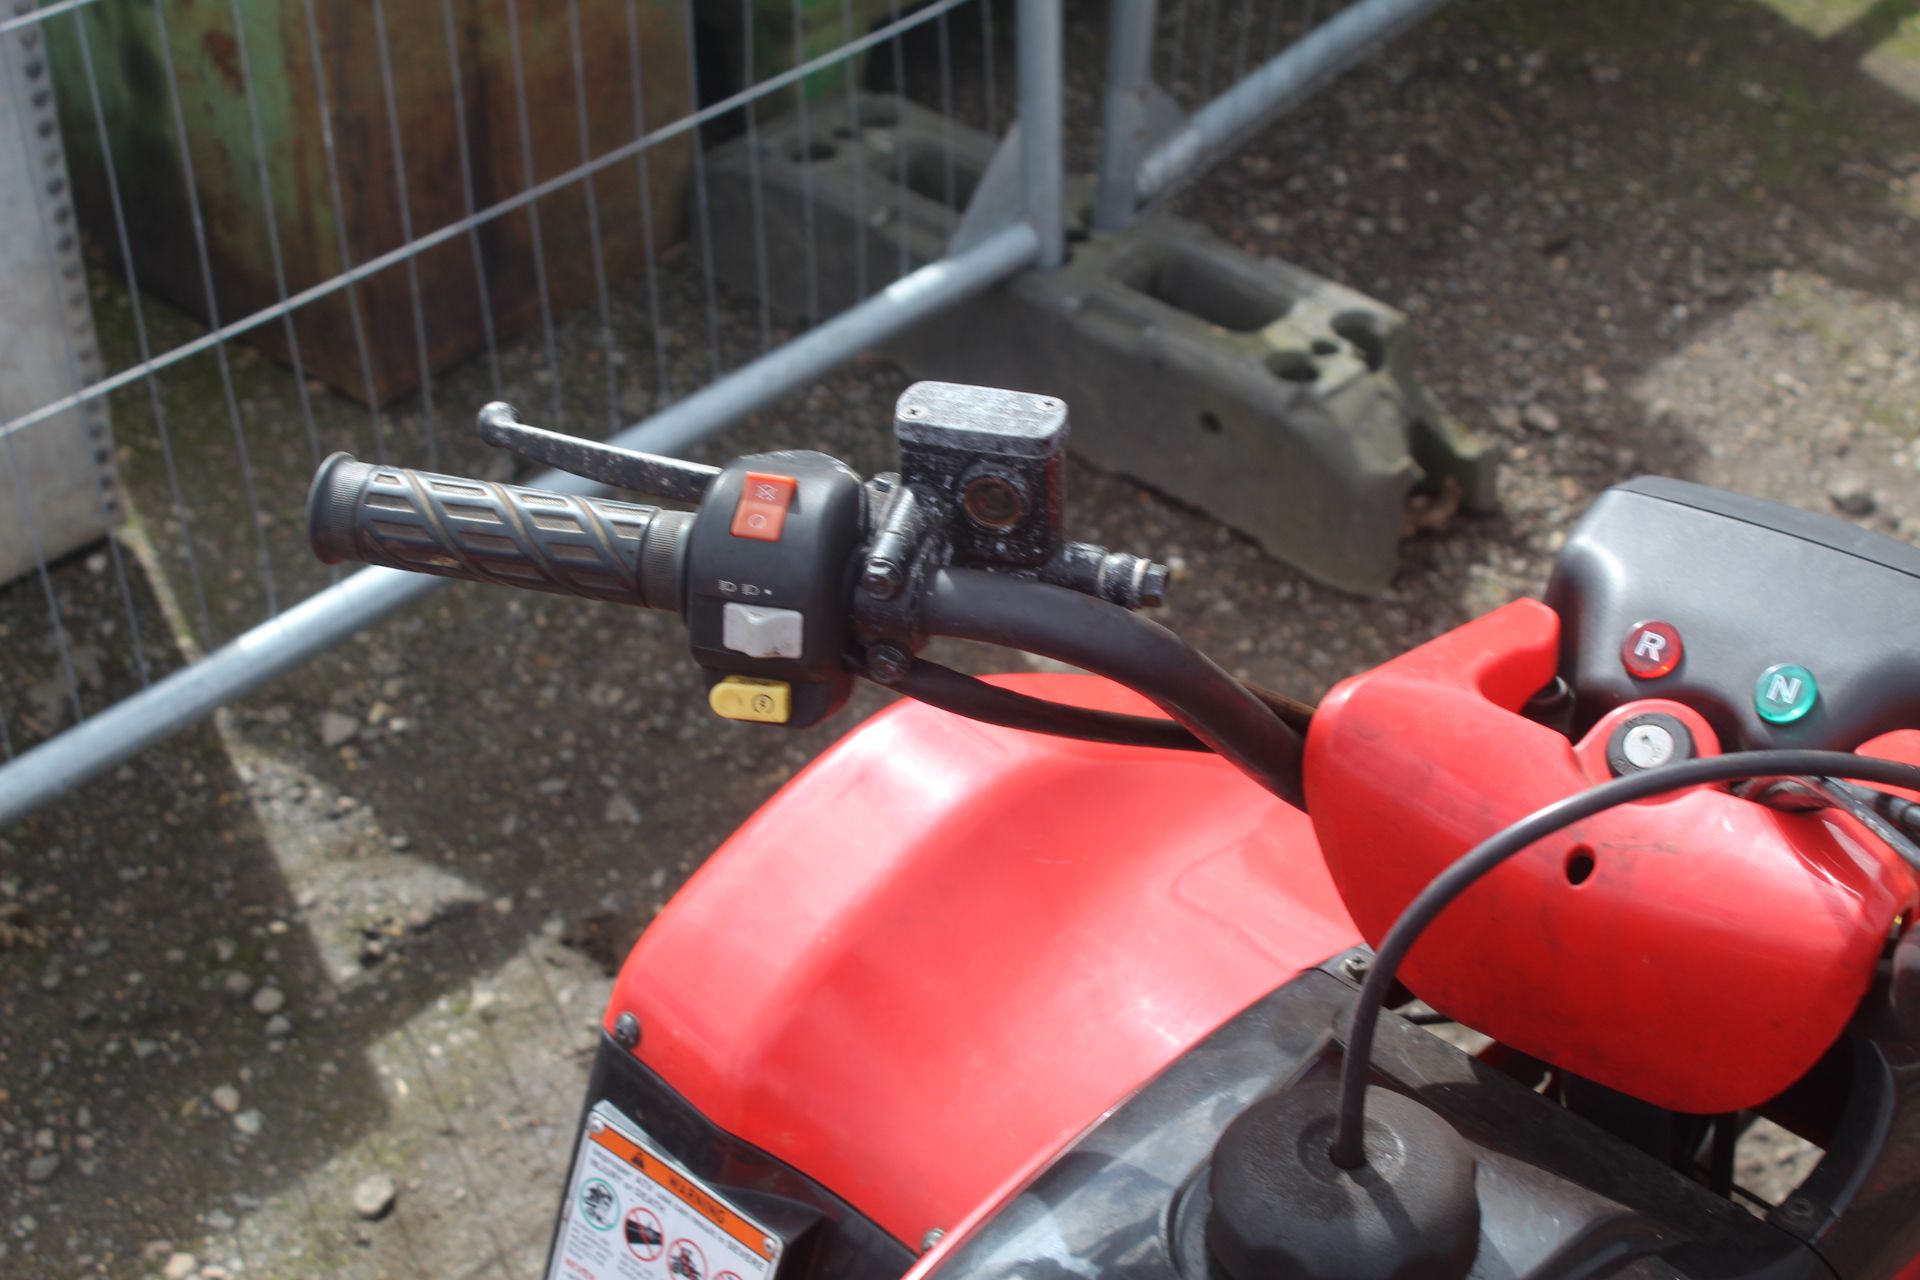 Kymco MX'er 150cc off road ATV. 2004. owned from new. Key, Manual held. - Image 6 of 18